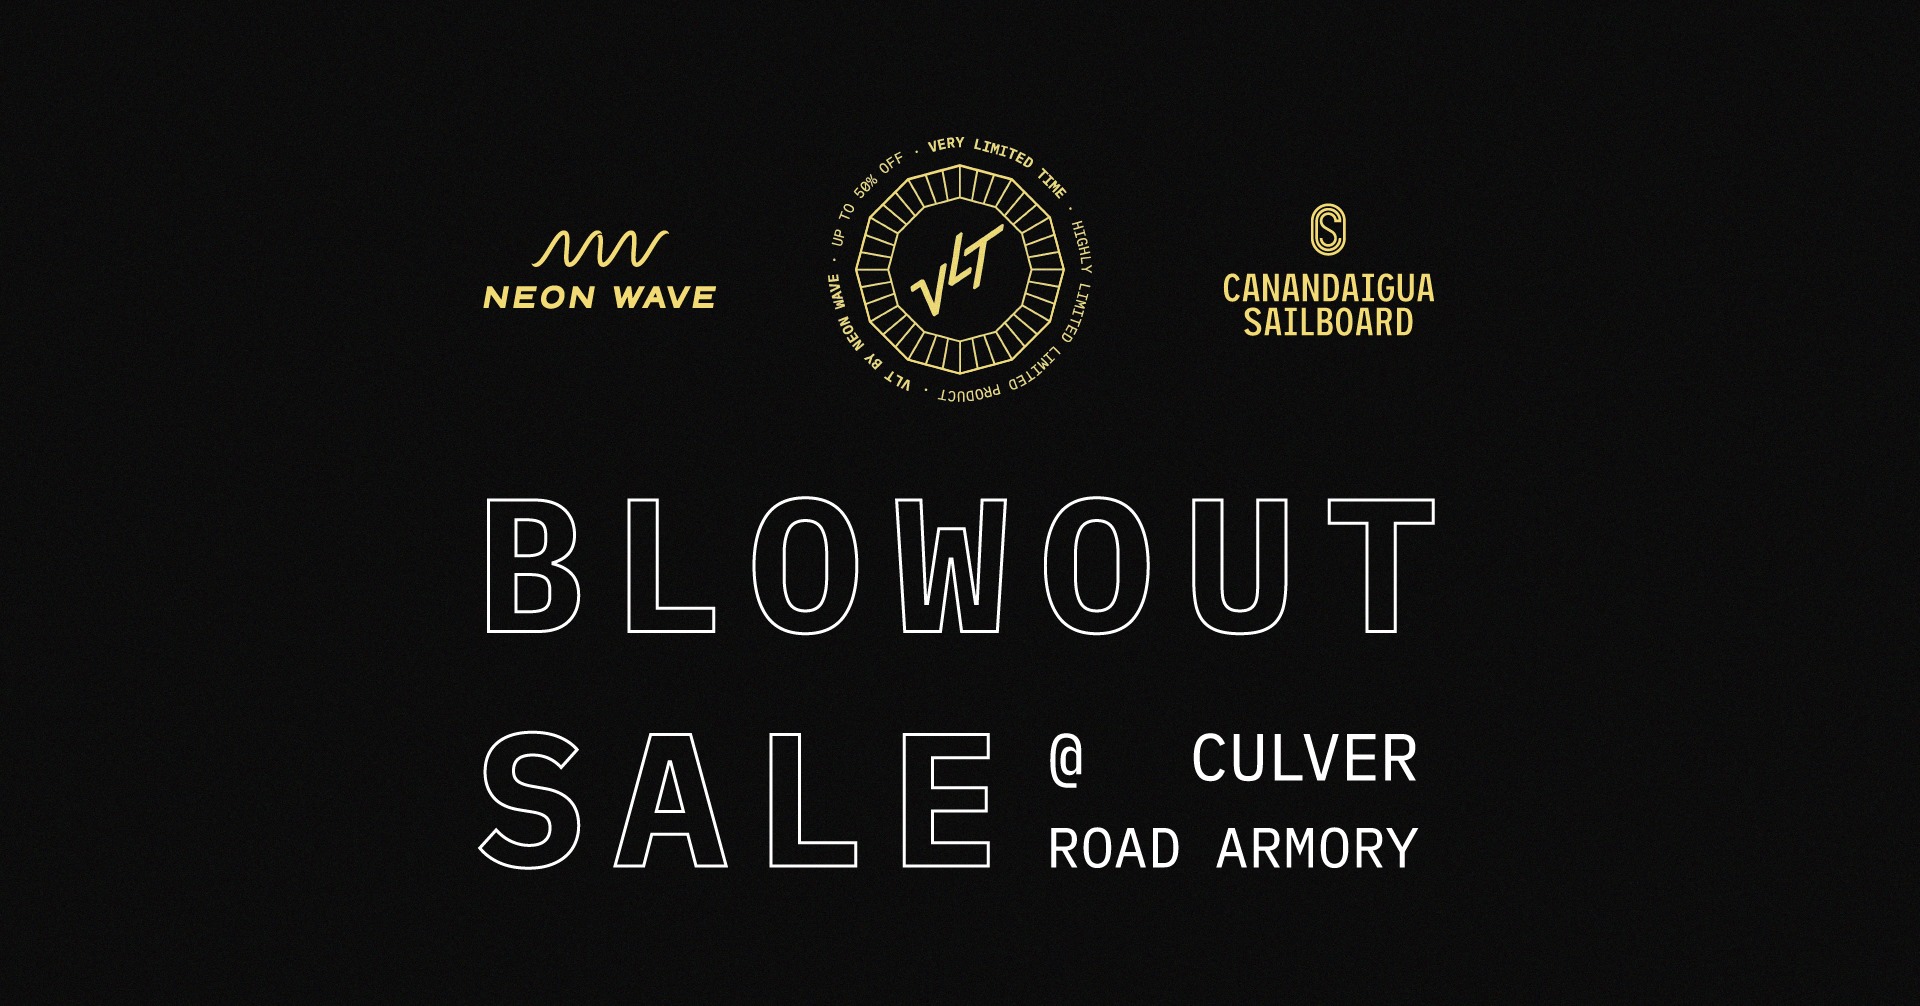 April 2nd-5th: VLT Blowout Sale by Neon Wave and Canandaigua Sailboard Event Image